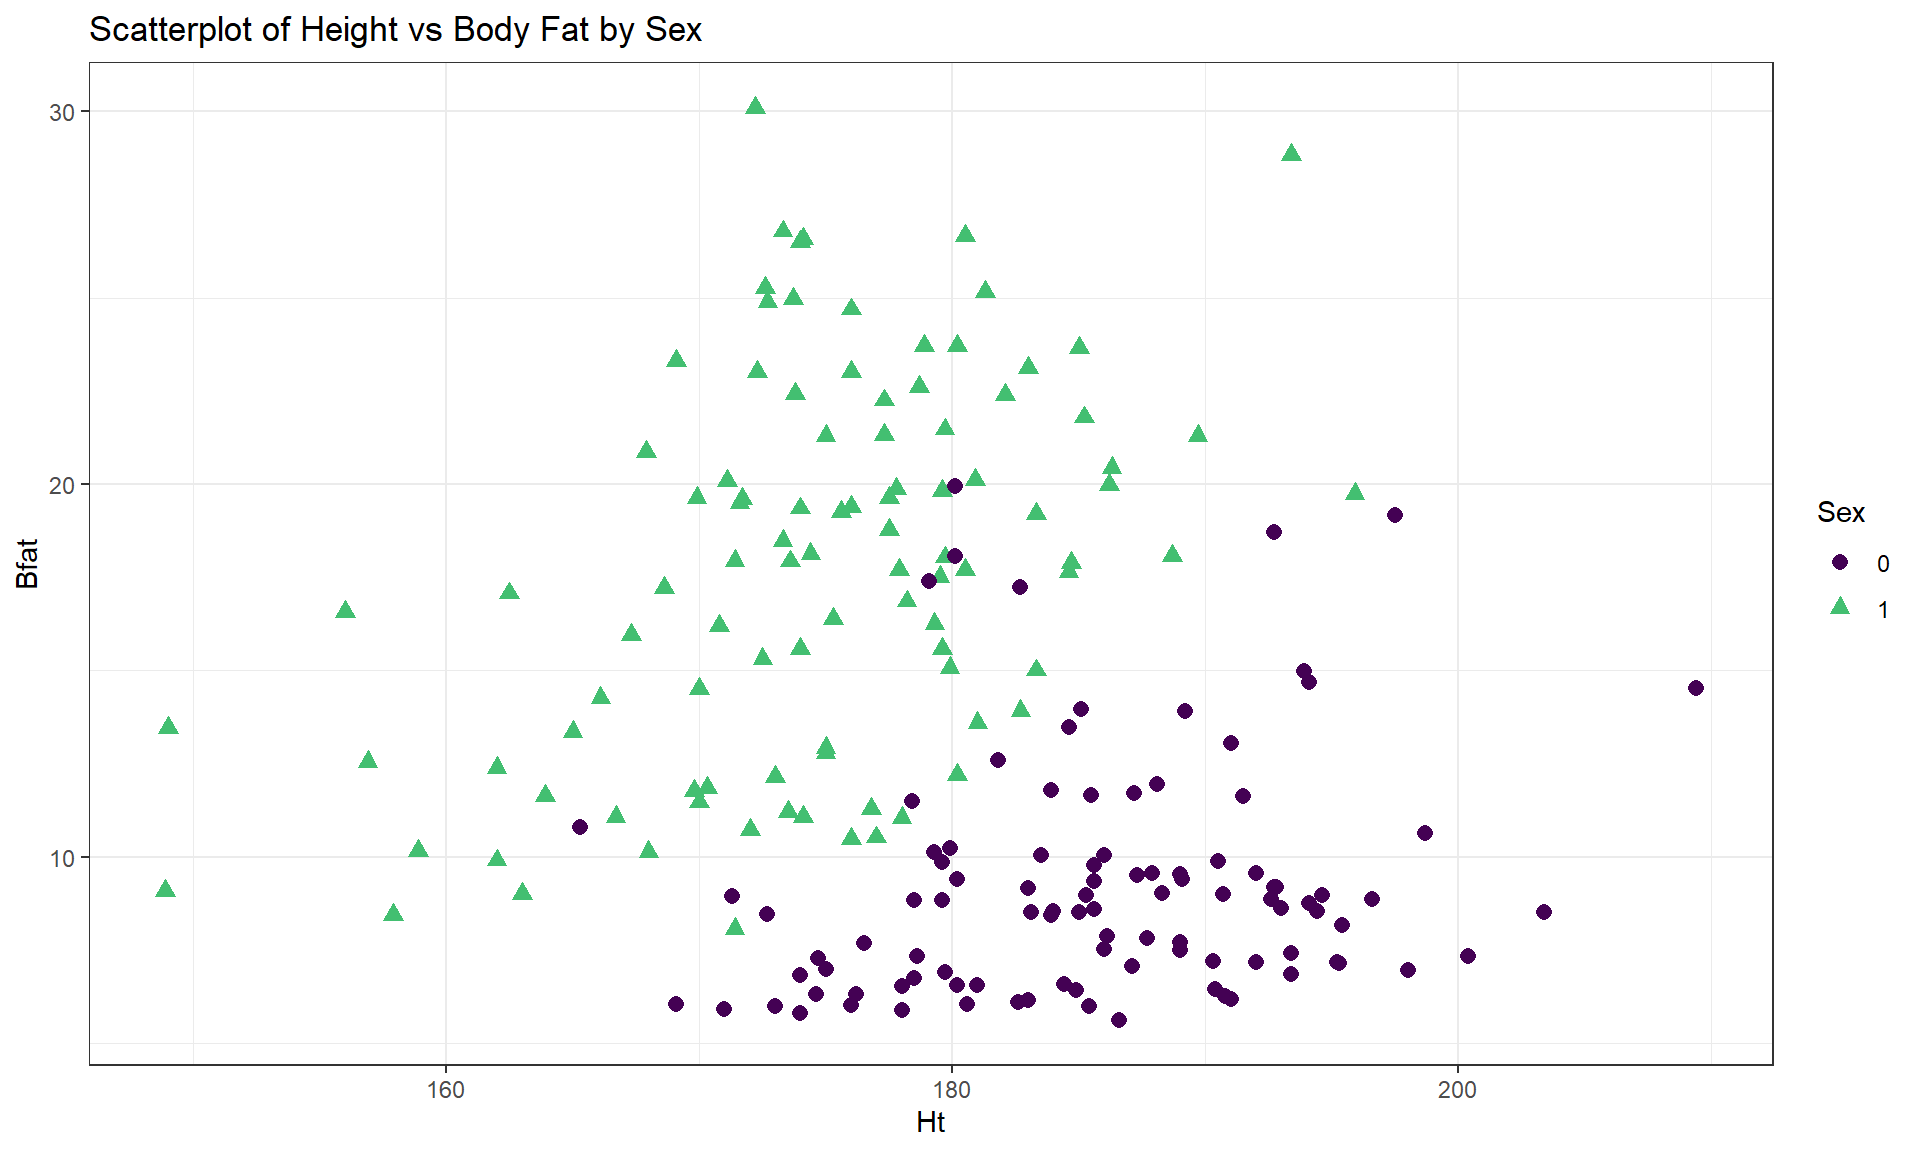 Scatterplot of athlete’s body fat and height by sex.